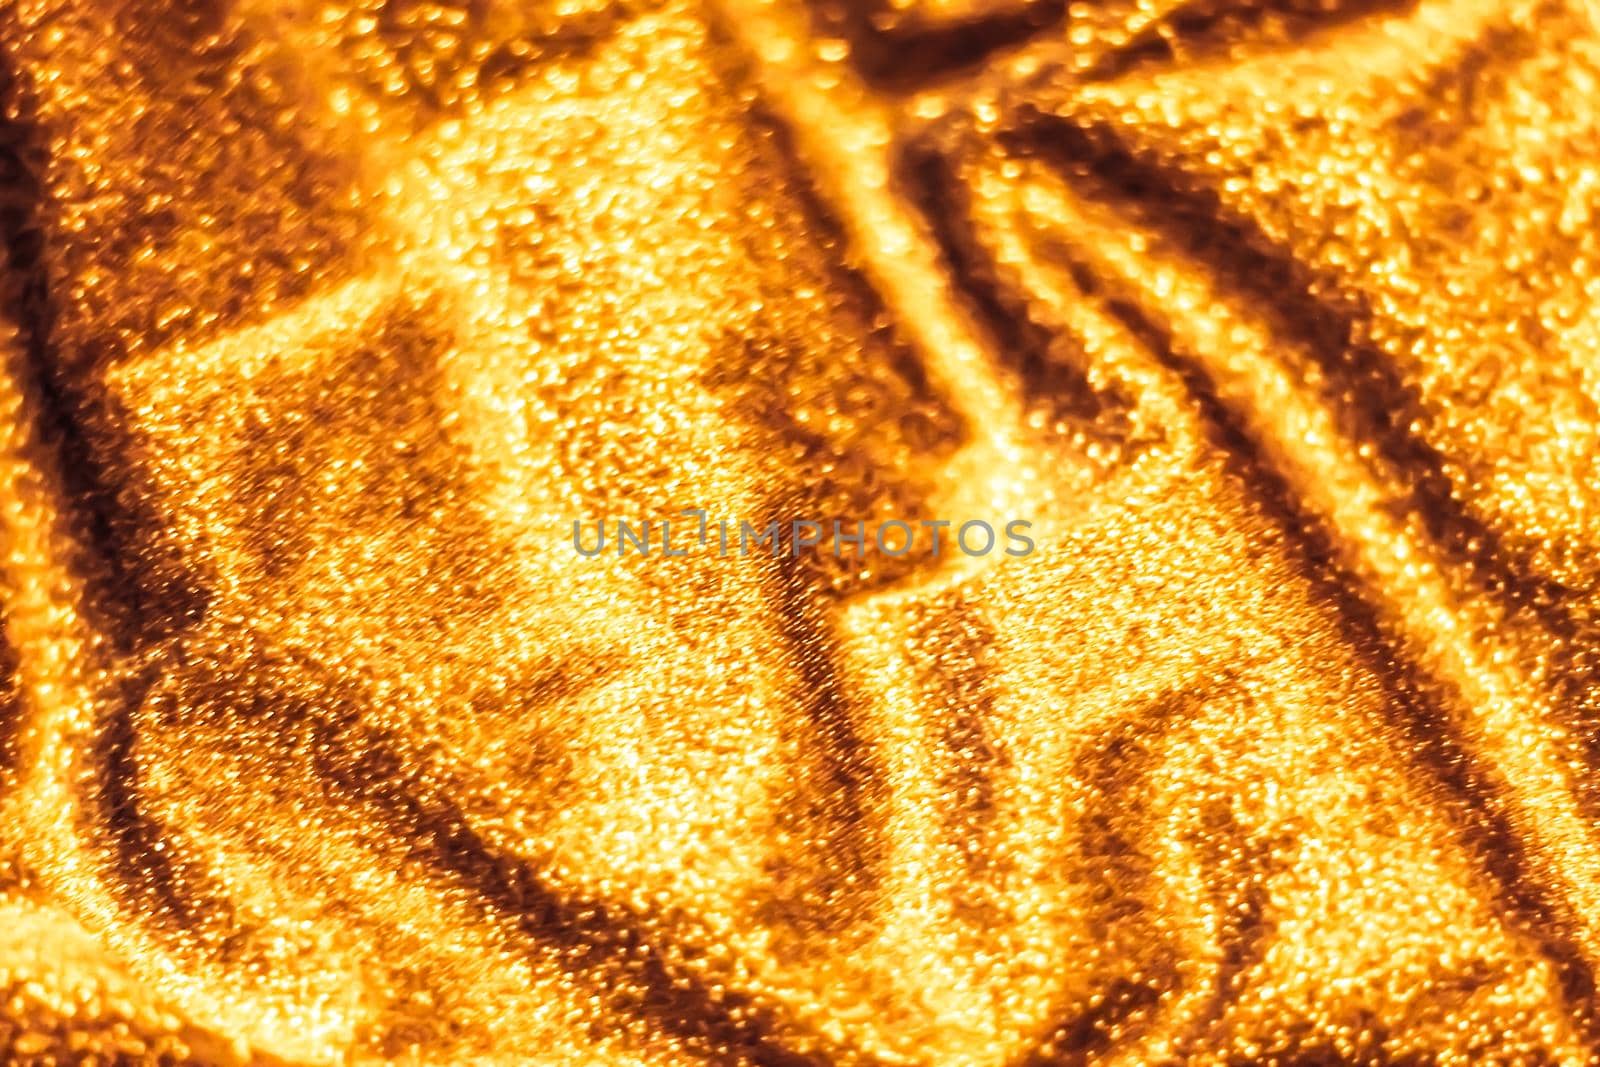 Luxe glowing texture, night club branding and New Years party concept - Golden holiday sparkling glitter abstract background, luxury shiny fabric material for glamour design and festive invitation